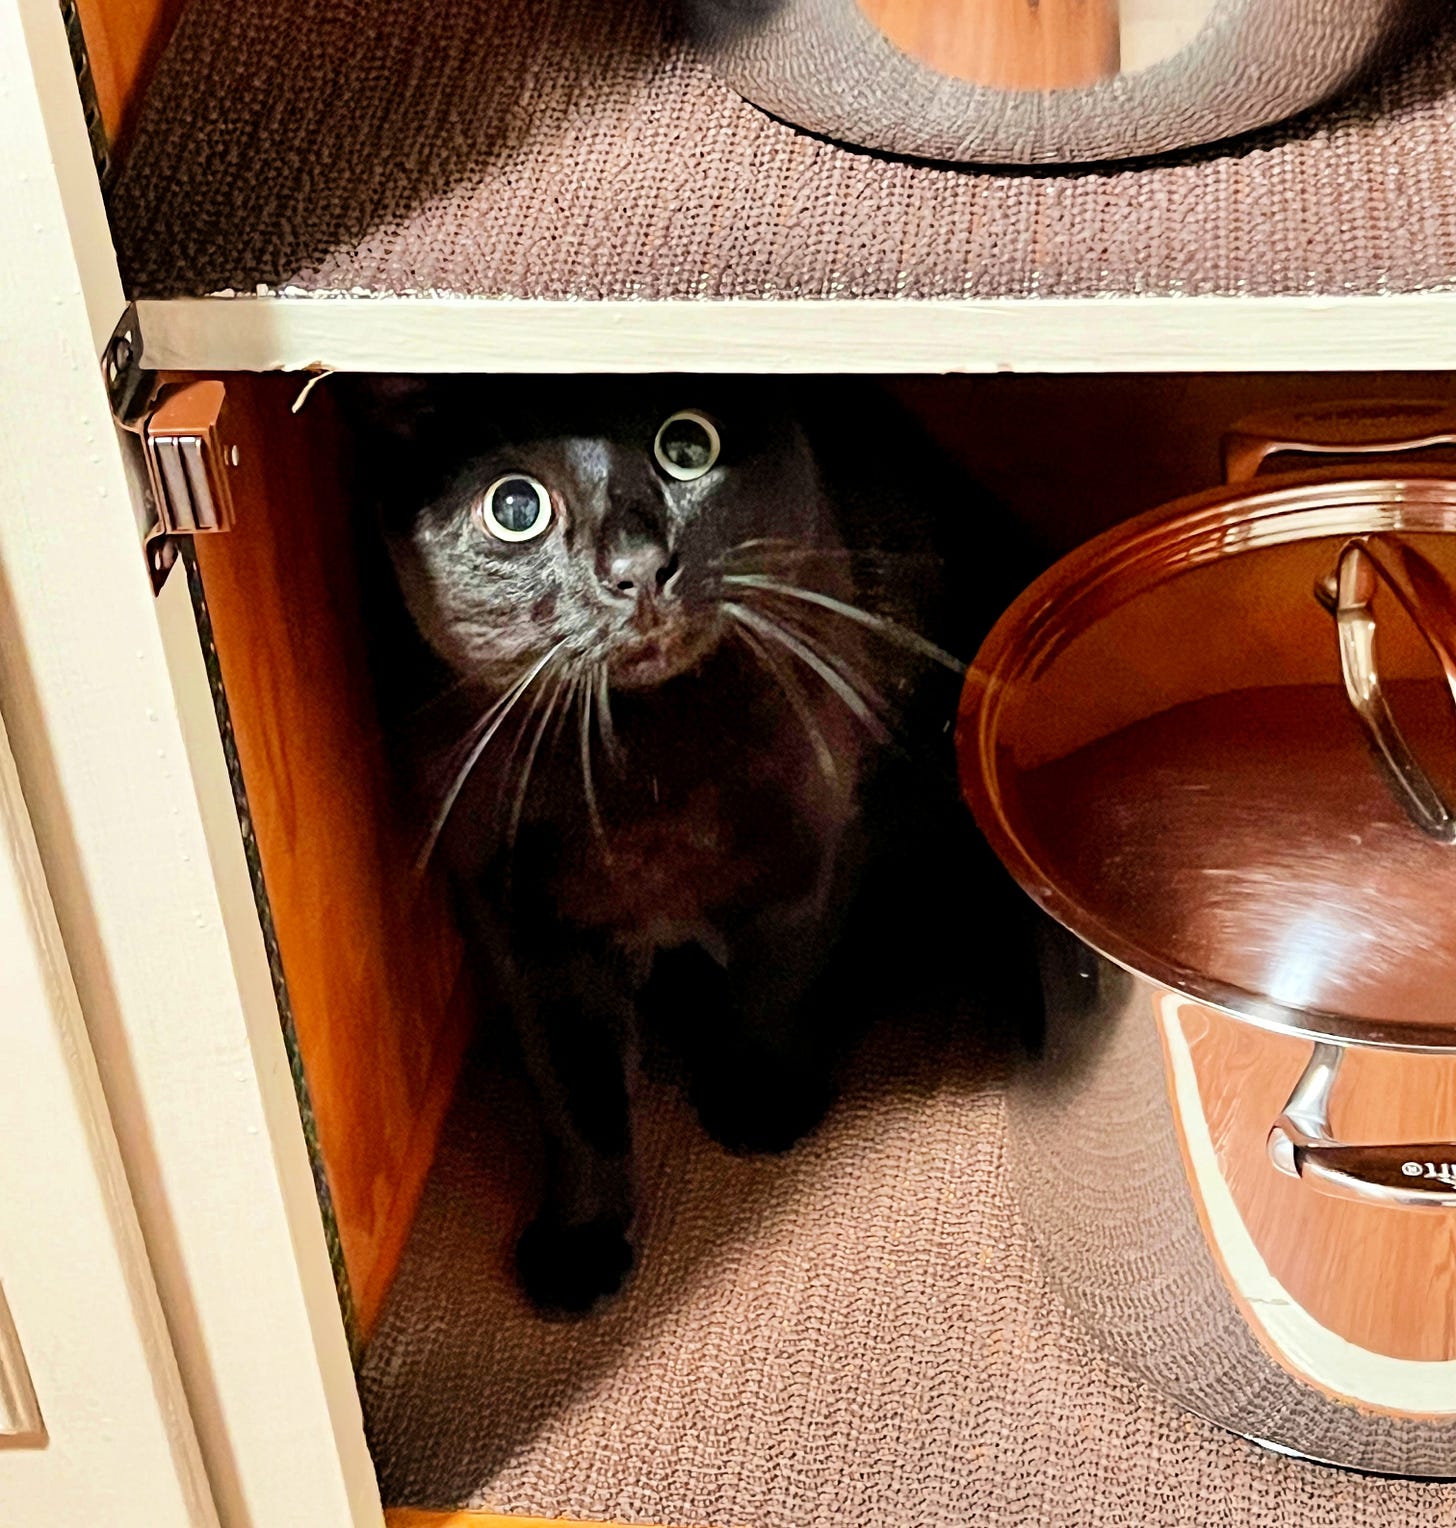 Black cat hiding in cupboard with pots & pans.